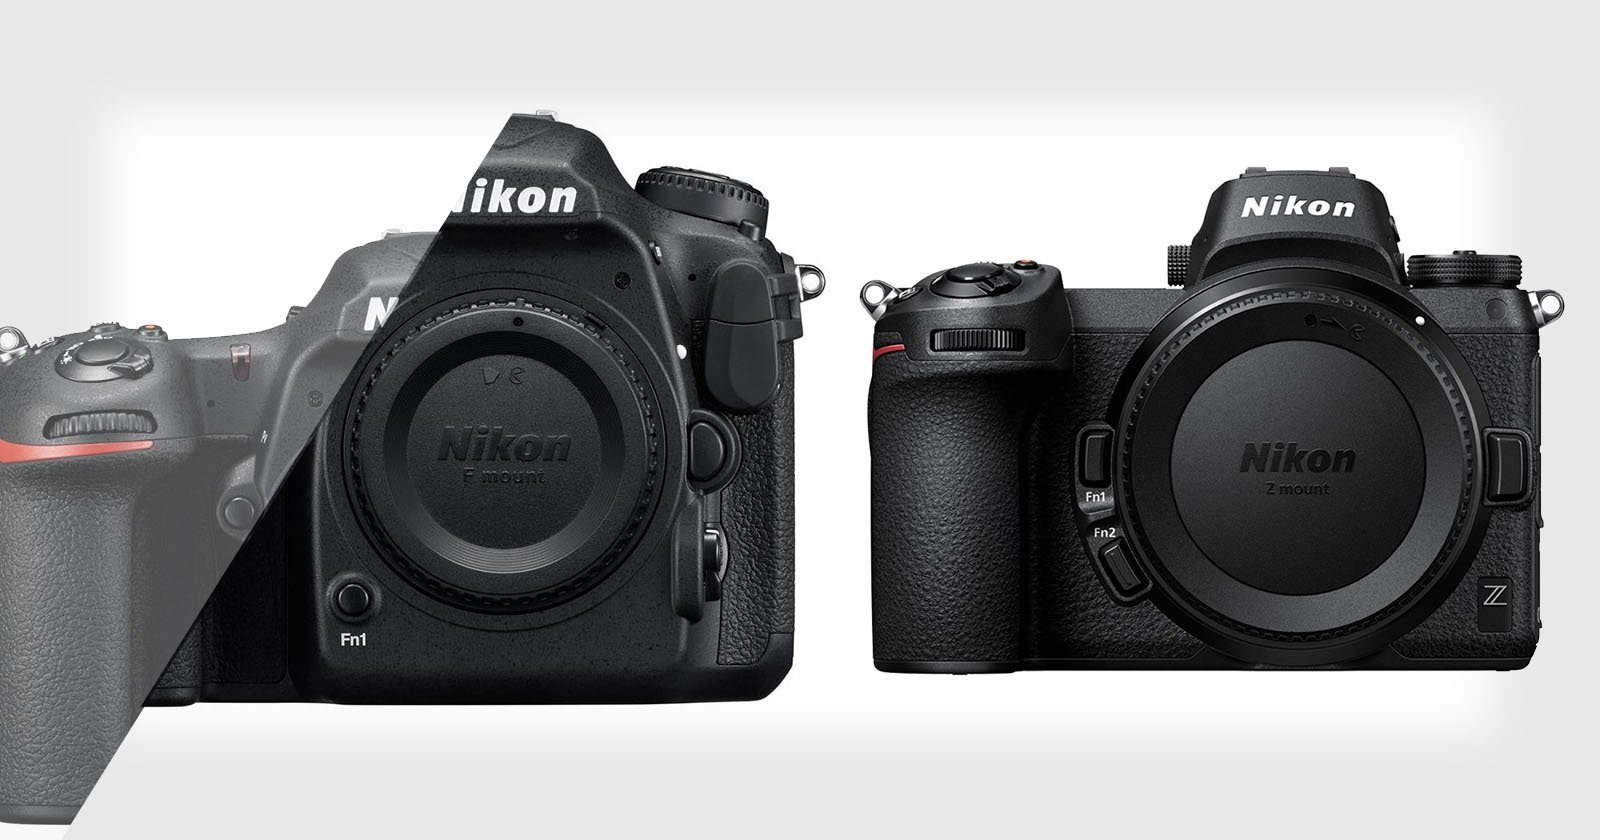 Nikon To Ditch 1 3 Of Its Dslr Lineup In Shift To Mirrorless Report